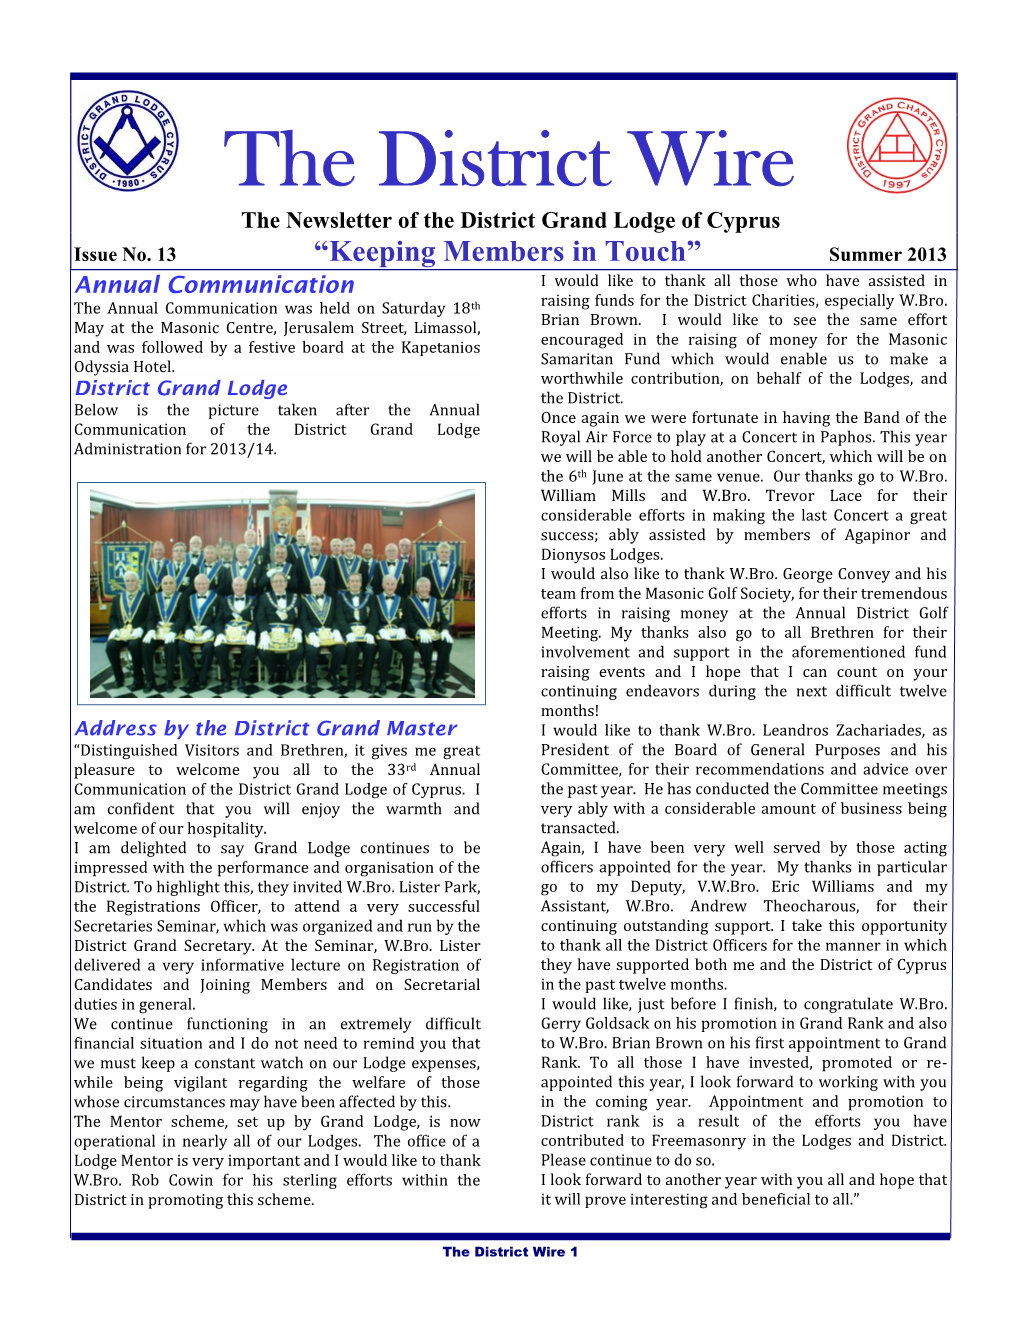 The District Wire the Newsletter of the District Grand Lodge of Cyprus Issue No